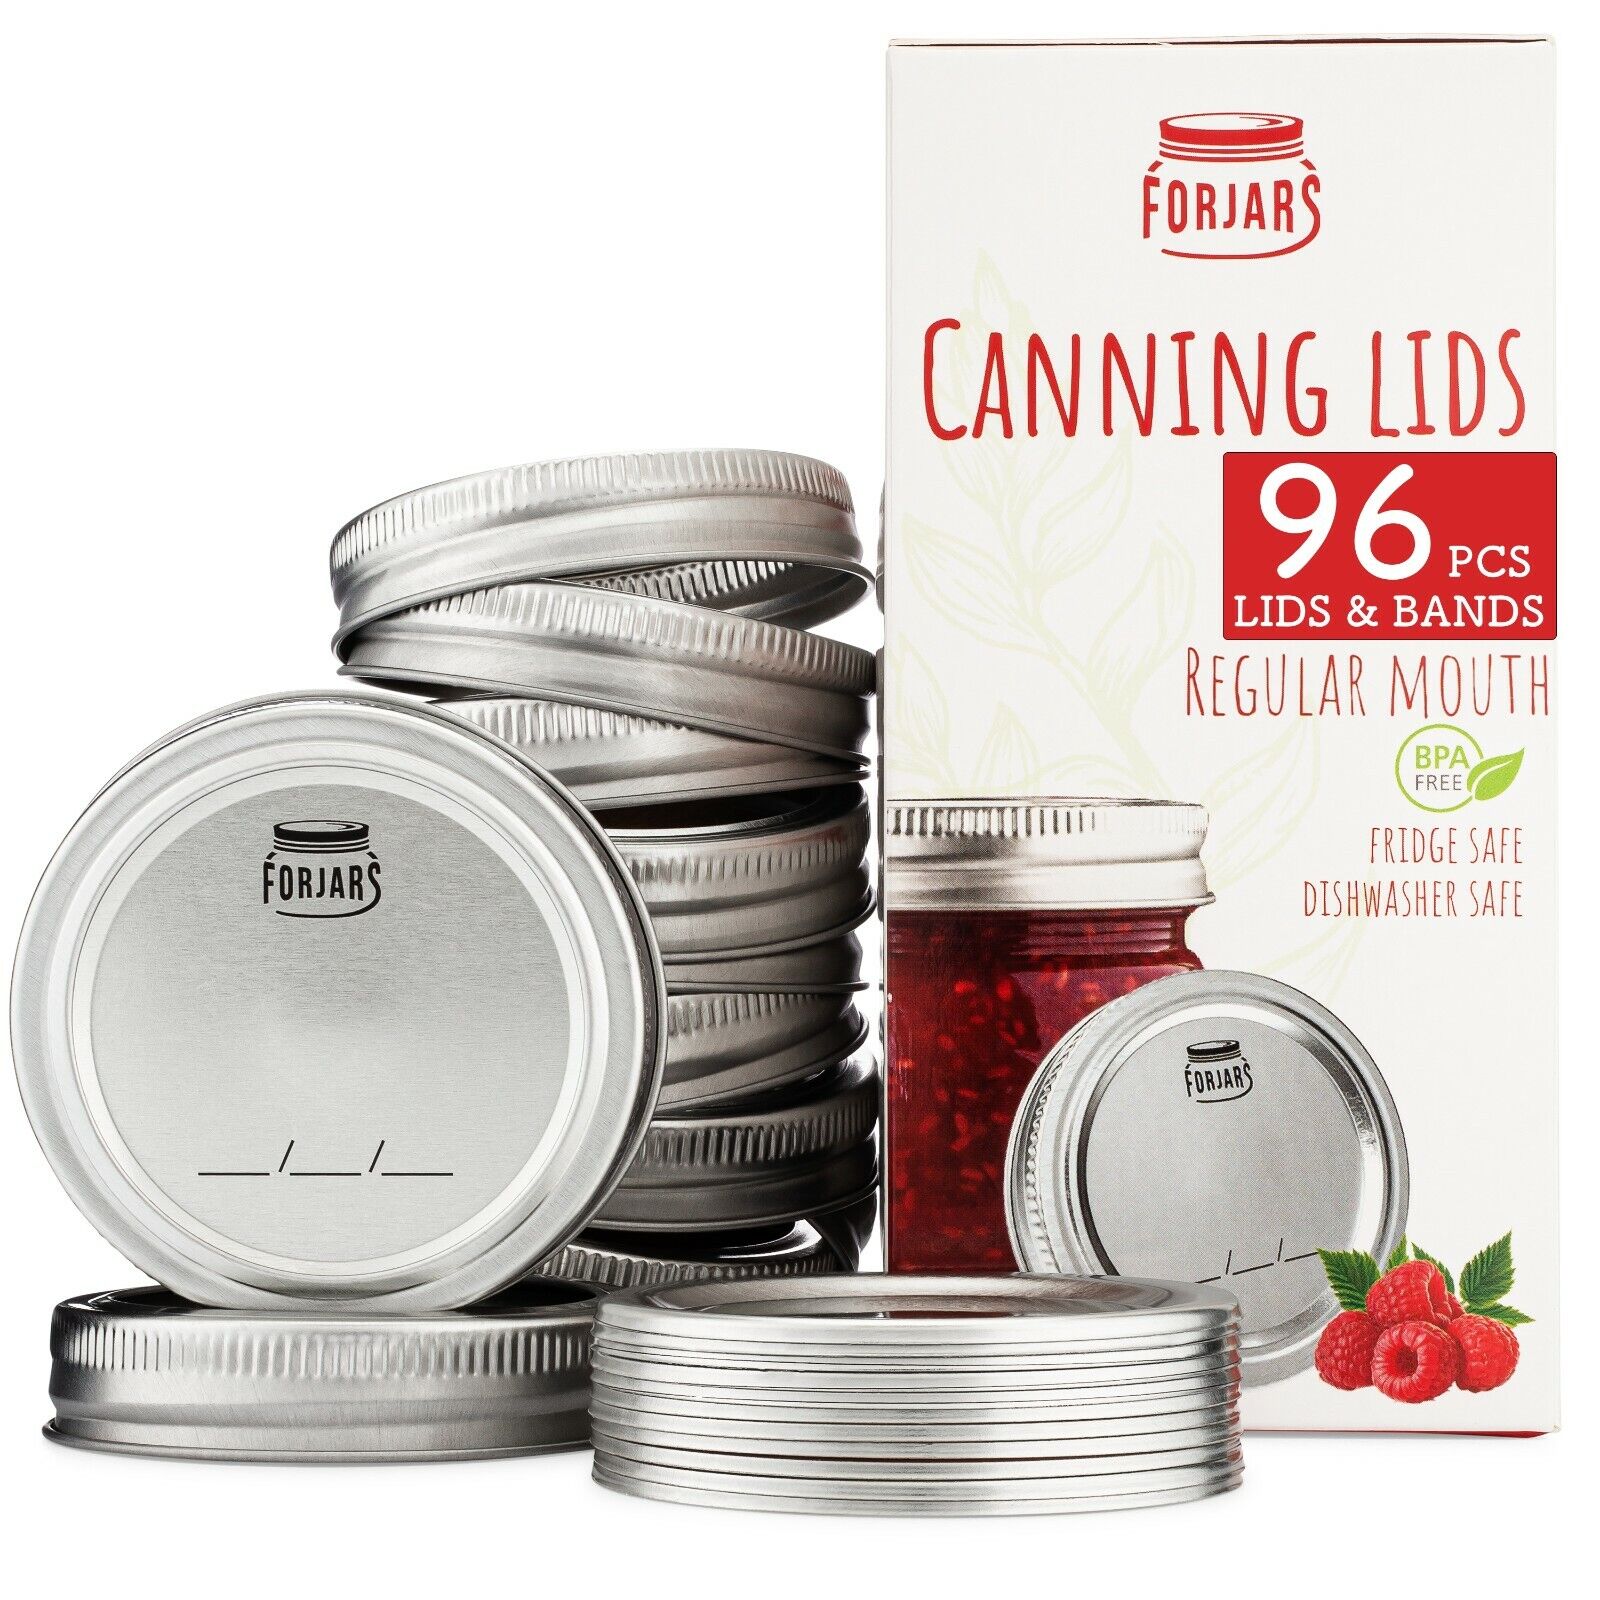 Canning Lids and Rings 192 Count / 96 Sets Regular Mouth USA in stock